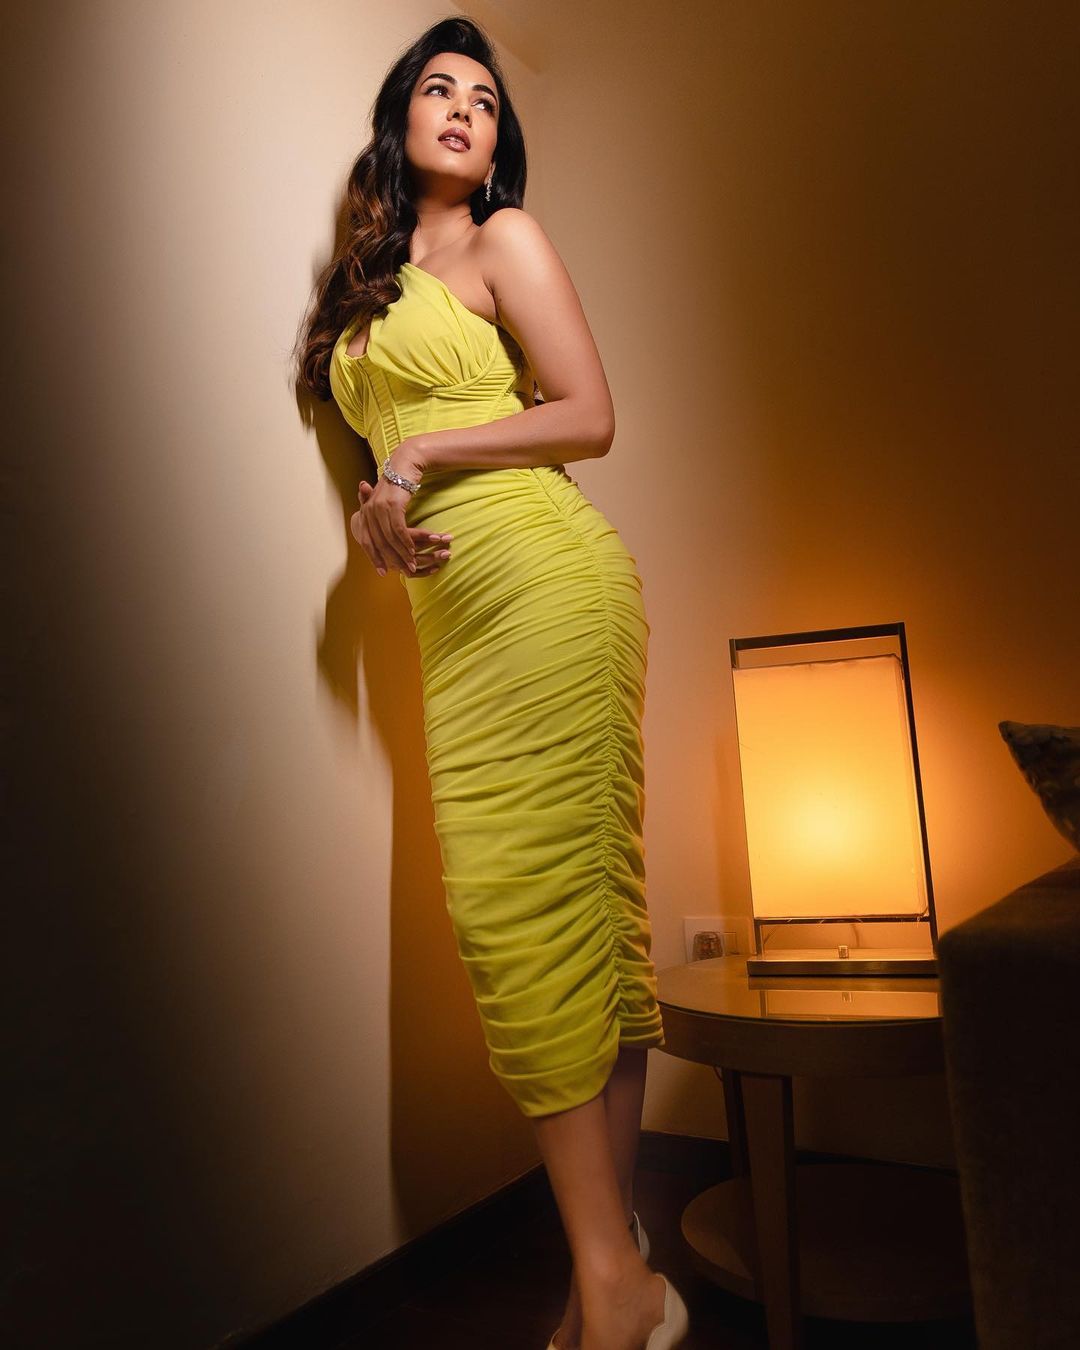 Sonal Chauhan is lighting up Instagram with her photos in a figure-hugging yellow dress.